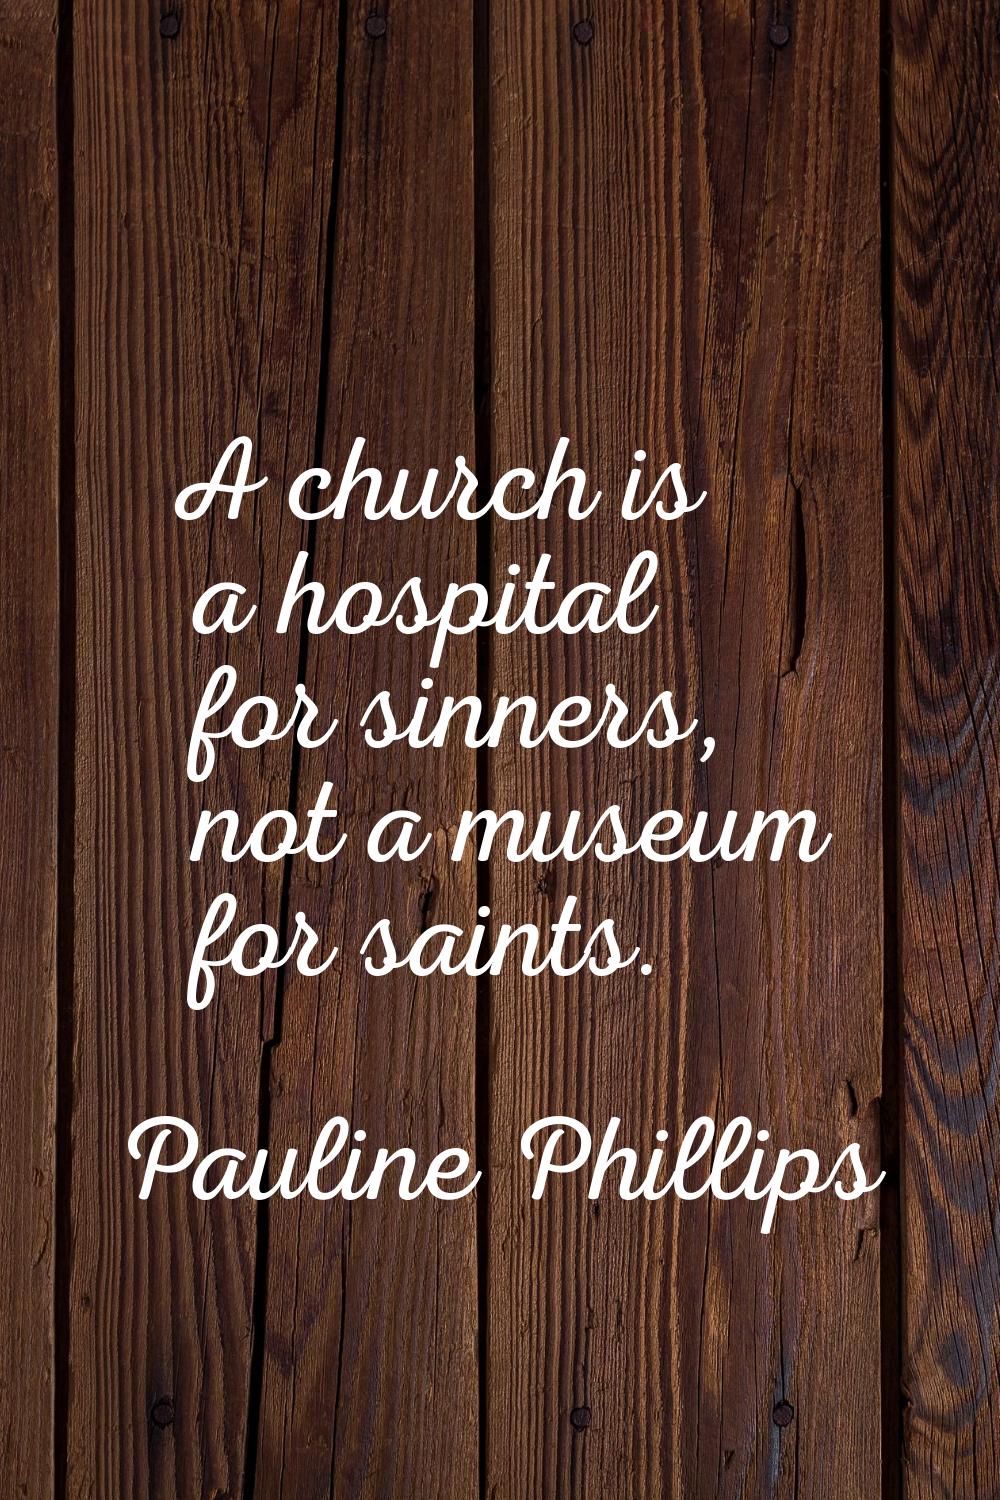 A church is a hospital for sinners, not a museum for saints.